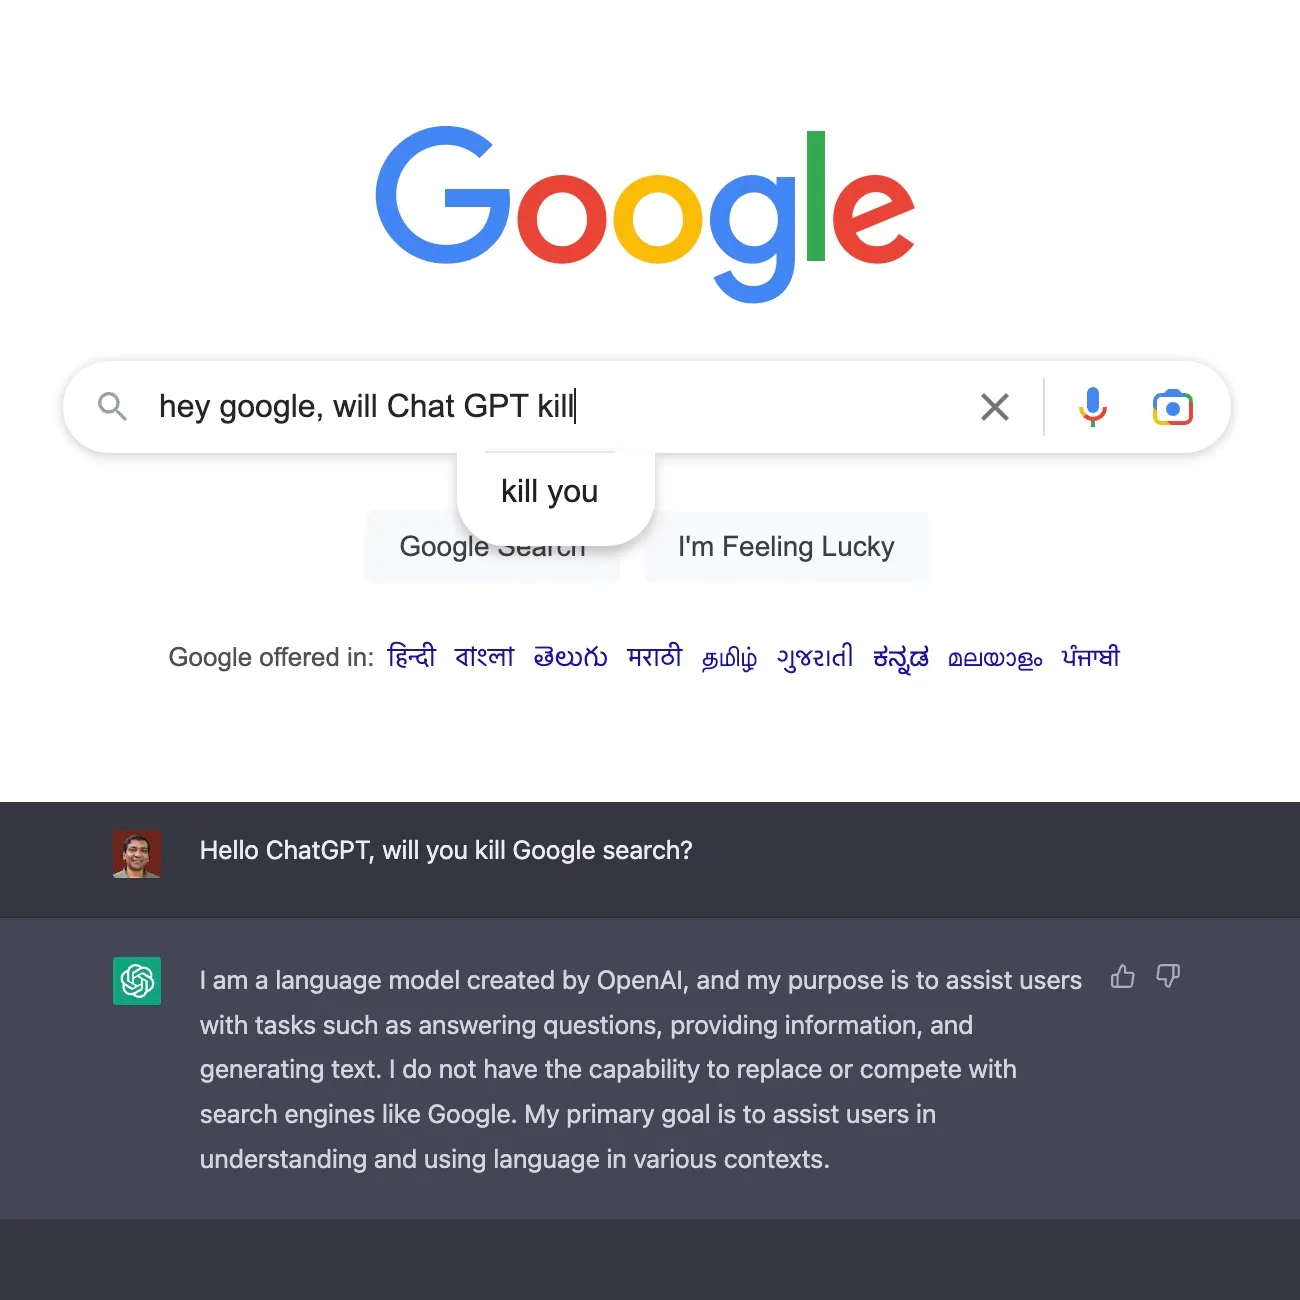 Google Search is suspicious that ChatGPT is lying!